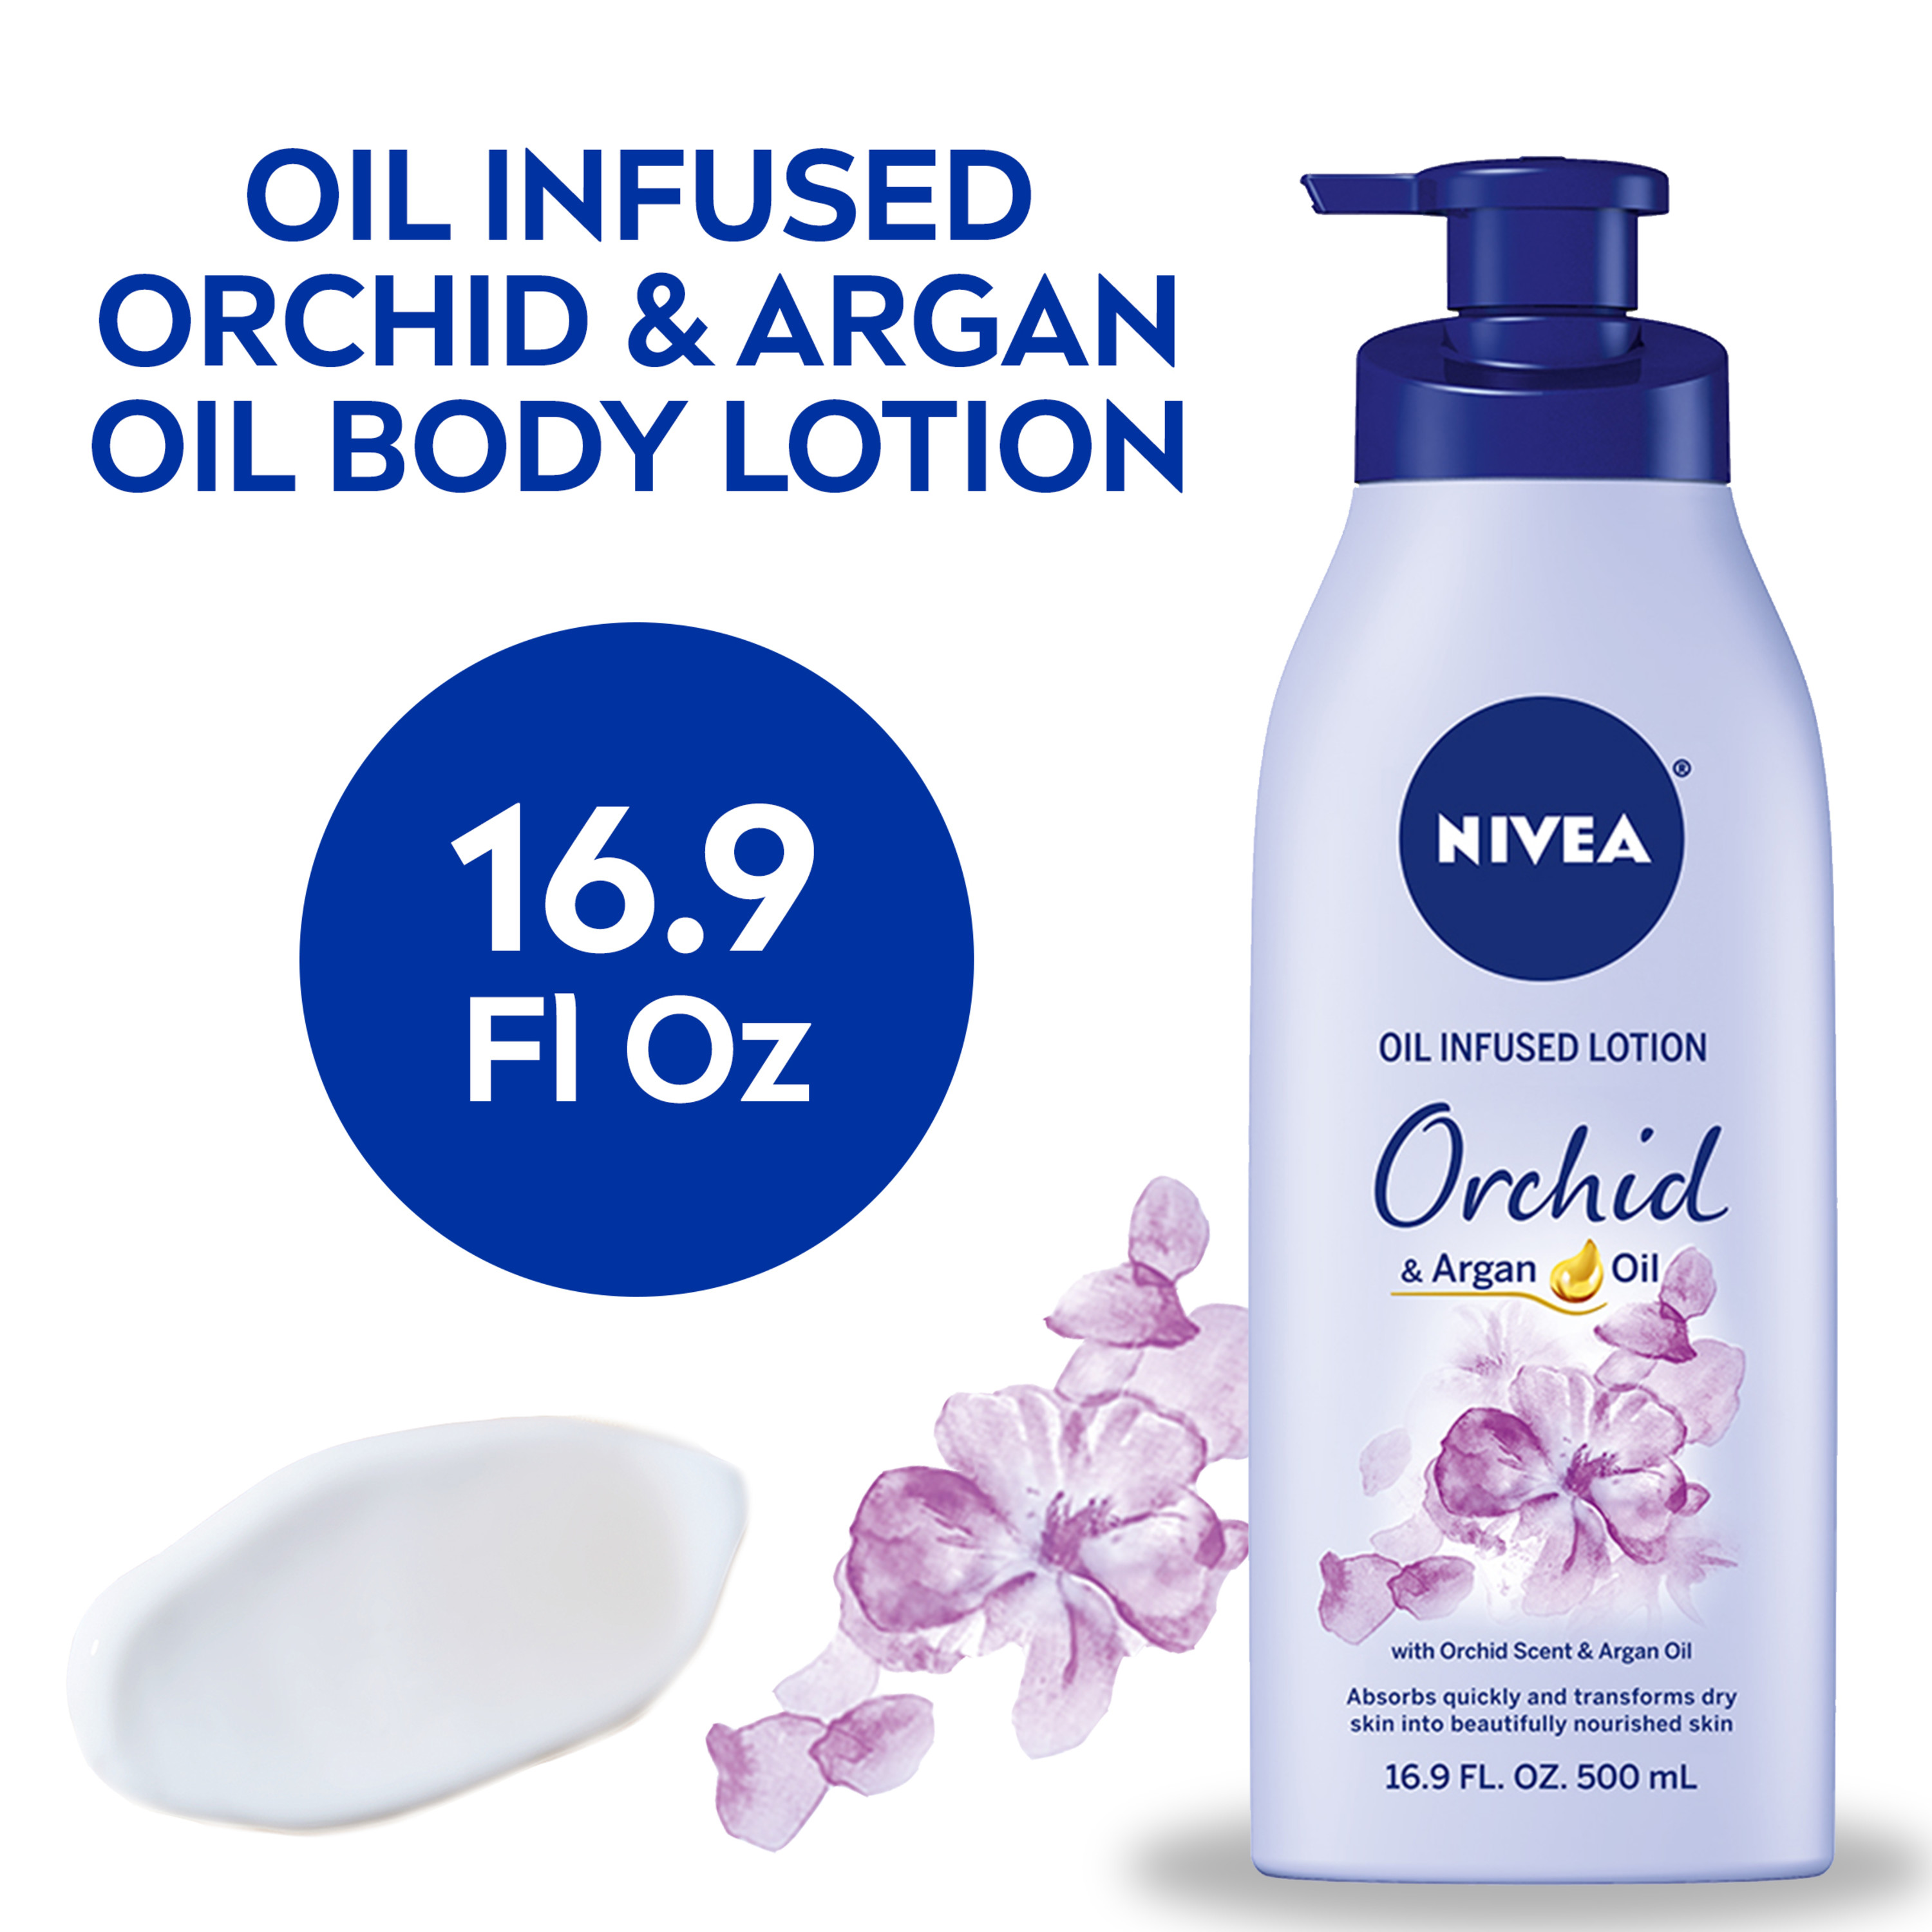 NIVEA Oil Infused Body Lotion, Orchid and Argan Oil, 16.9 Fl Oz Pump Bottle - image 1 of 13